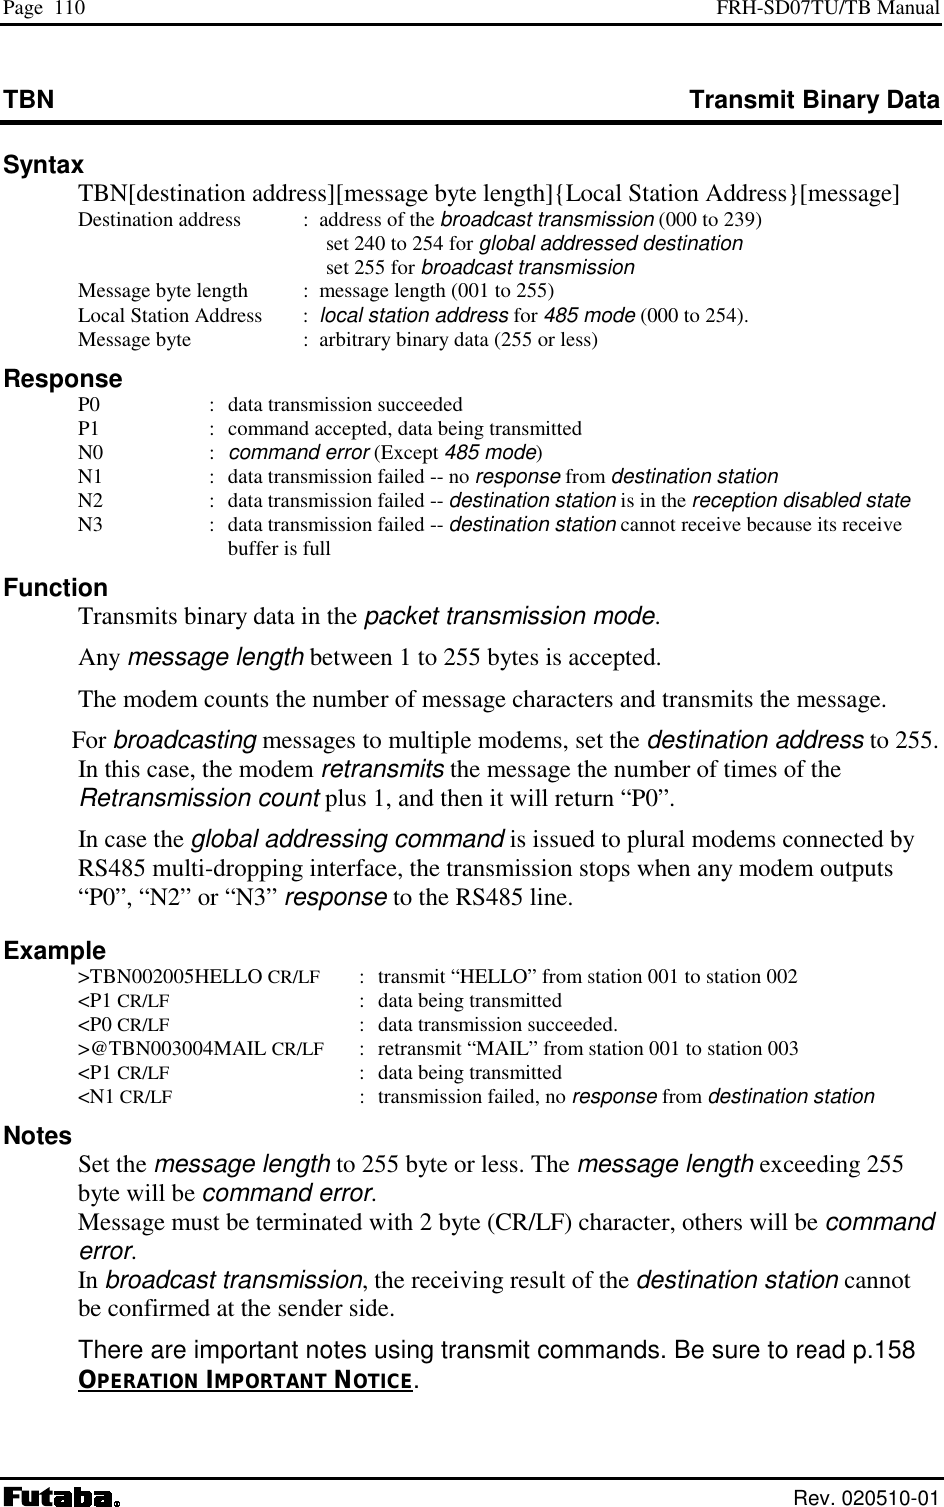 Page  110  FRH-SD07TU/TB Manual  Rev. 020510-01 TBN  Transmit Binary Data Syntax   TBN[destination address][message byte length]{Local Station Address}[message]   Destination address  :  address of the broadcast transmission (000 to 239)     set 240 to 254 for global addressed destination    set 255 for broadcast transmission   Message byte length  :  message length (001 to 255)   Local Station Address     :  local station address for 485 mode (000 to 254).   Message byte    :  arbitrary binary data (255 or less) Response   P0  :  data transmission succeeded   P1  :  command accepted, data being transmitted  N0  : command error (Except 485 mode)   N1  :  data transmission failed -- no response from destination station   N2  :  data transmission failed -- destination station is in the reception disabled state   N3  :  data transmission failed -- destination station cannot receive because its receive buffer is full Function   Transmits binary data in the packet transmission mode.  Any message length between 1 to 255 bytes is accepted.   The modem counts the number of message characters and transmits the message.  For broadcasting messages to multiple modems, set the destination address to 255. In this case, the modem retransmits the message the number of times of the Retransmission count plus 1, and then it will return “P0”.   In case the global addressing command is issued to plural modems connected by RS485 multi-dropping interface, the transmission stops when any modem outputs “P0”, “N2” or “N3” response to the RS485 line. Example  &gt;TBN002005HELLO CR/LF  :  transmit “HELLO” from station 001 to station 002  &lt;P1 CR/LF  :  data being transmitted  &lt;P0 CR/LF  :  data transmission succeeded.  &gt;@TBN003004MAIL CR/LF  :  retransmit “MAIL” from station 001 to station 003  &lt;P1 CR/LF  :  data being transmitted  &lt;N1 CR/LF  :  transmission failed, no response from destination station Notes  Set the message length to 255 byte or less. The message length exceeding 255 byte will be command error. Message must be terminated with 2 byte (CR/LF) character, others will be command error. In broadcast transmission, the receiving result of the destination station cannot be confirmed at the sender side. There are important notes using transmit commands. Be sure to read p.158 OPERATION IMPORTANT NOTICE. 